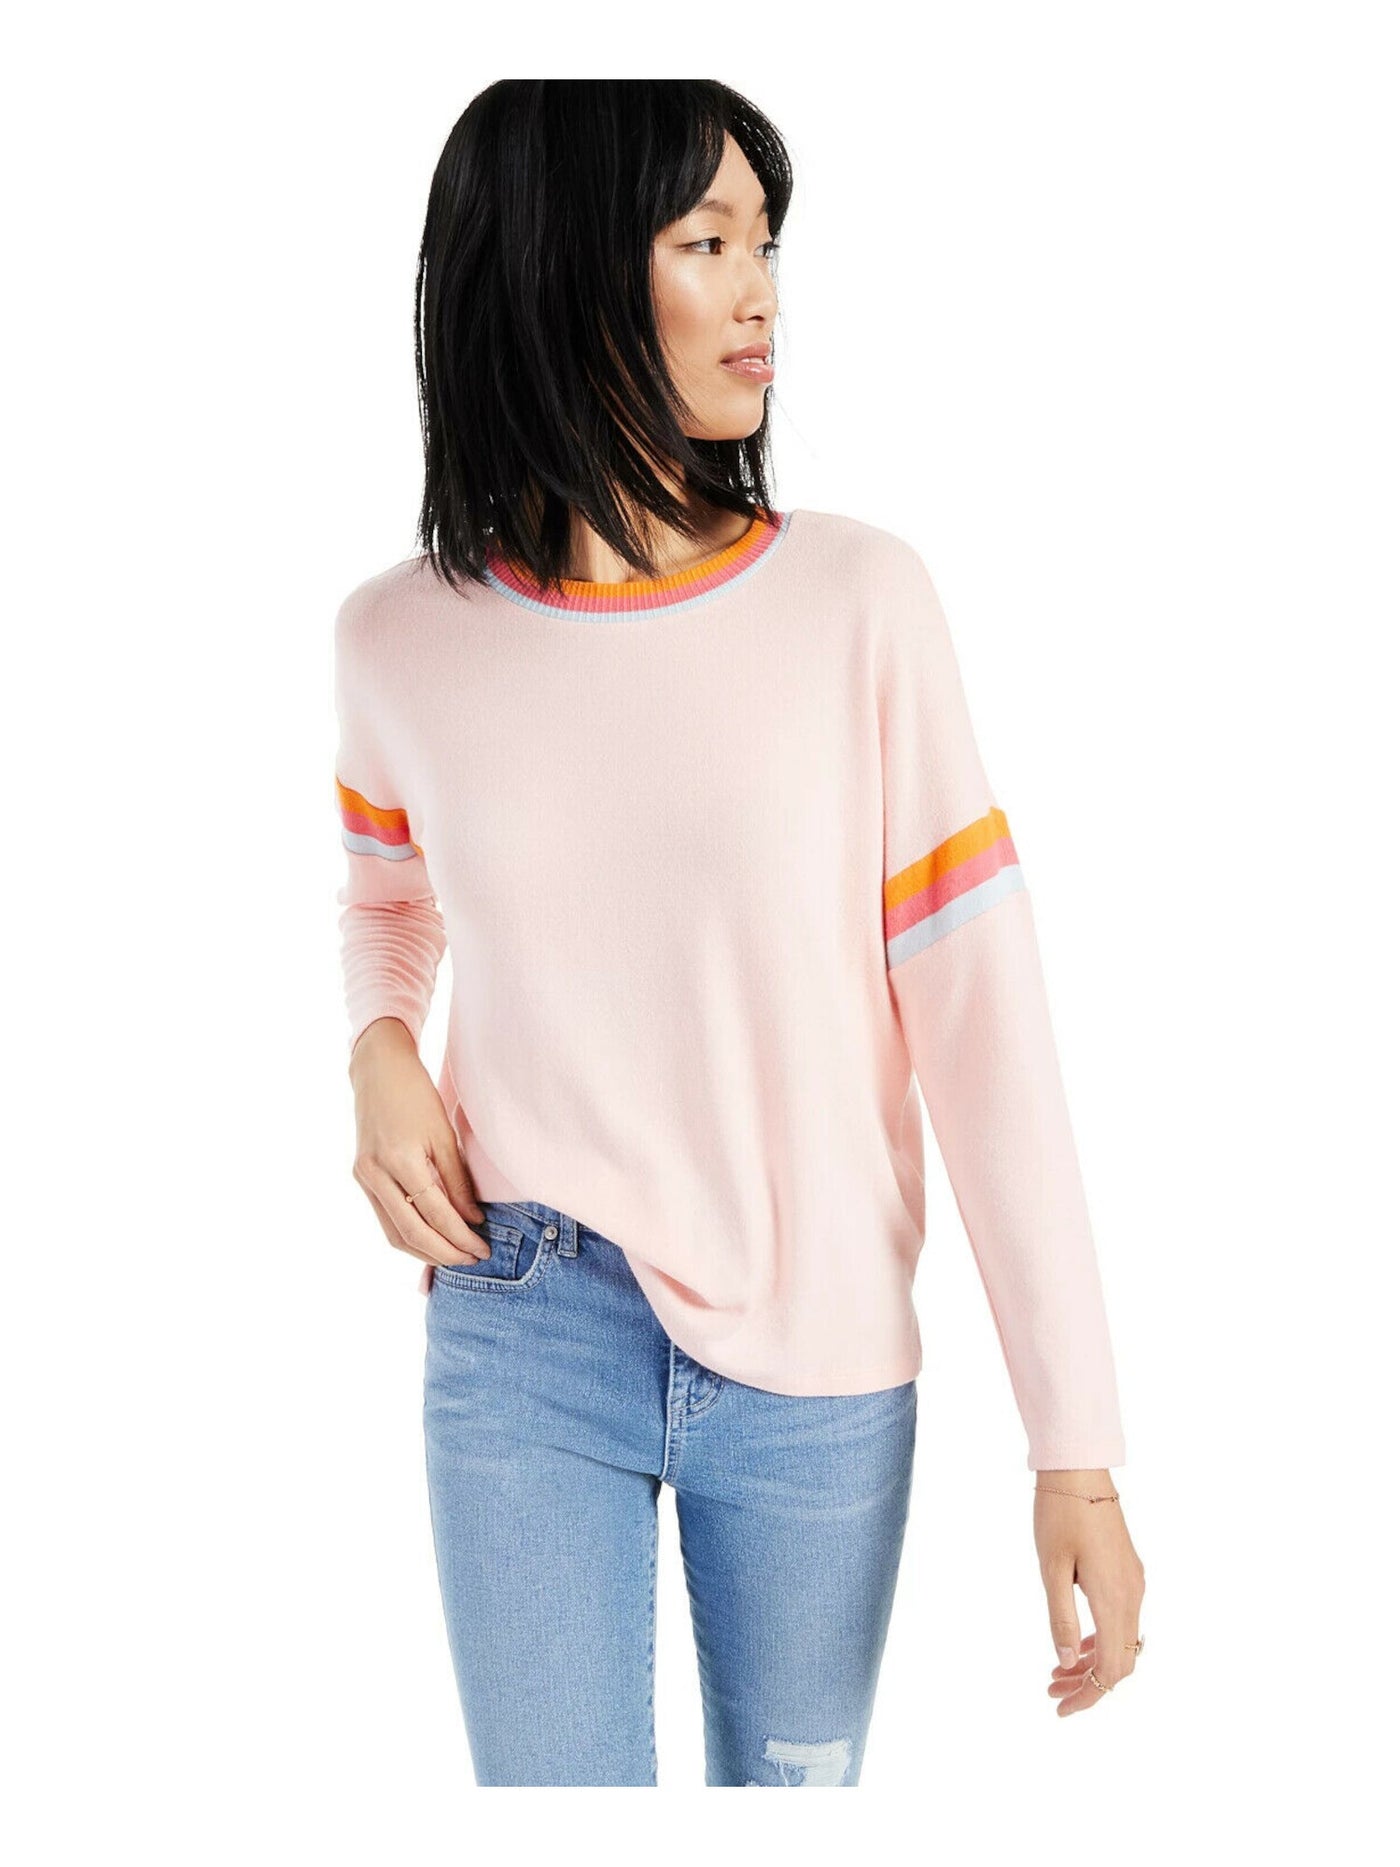 STYLE & COMPANY Womens Pink Color Block Long Sleeve Crew Neck Top Plus Size: 0X